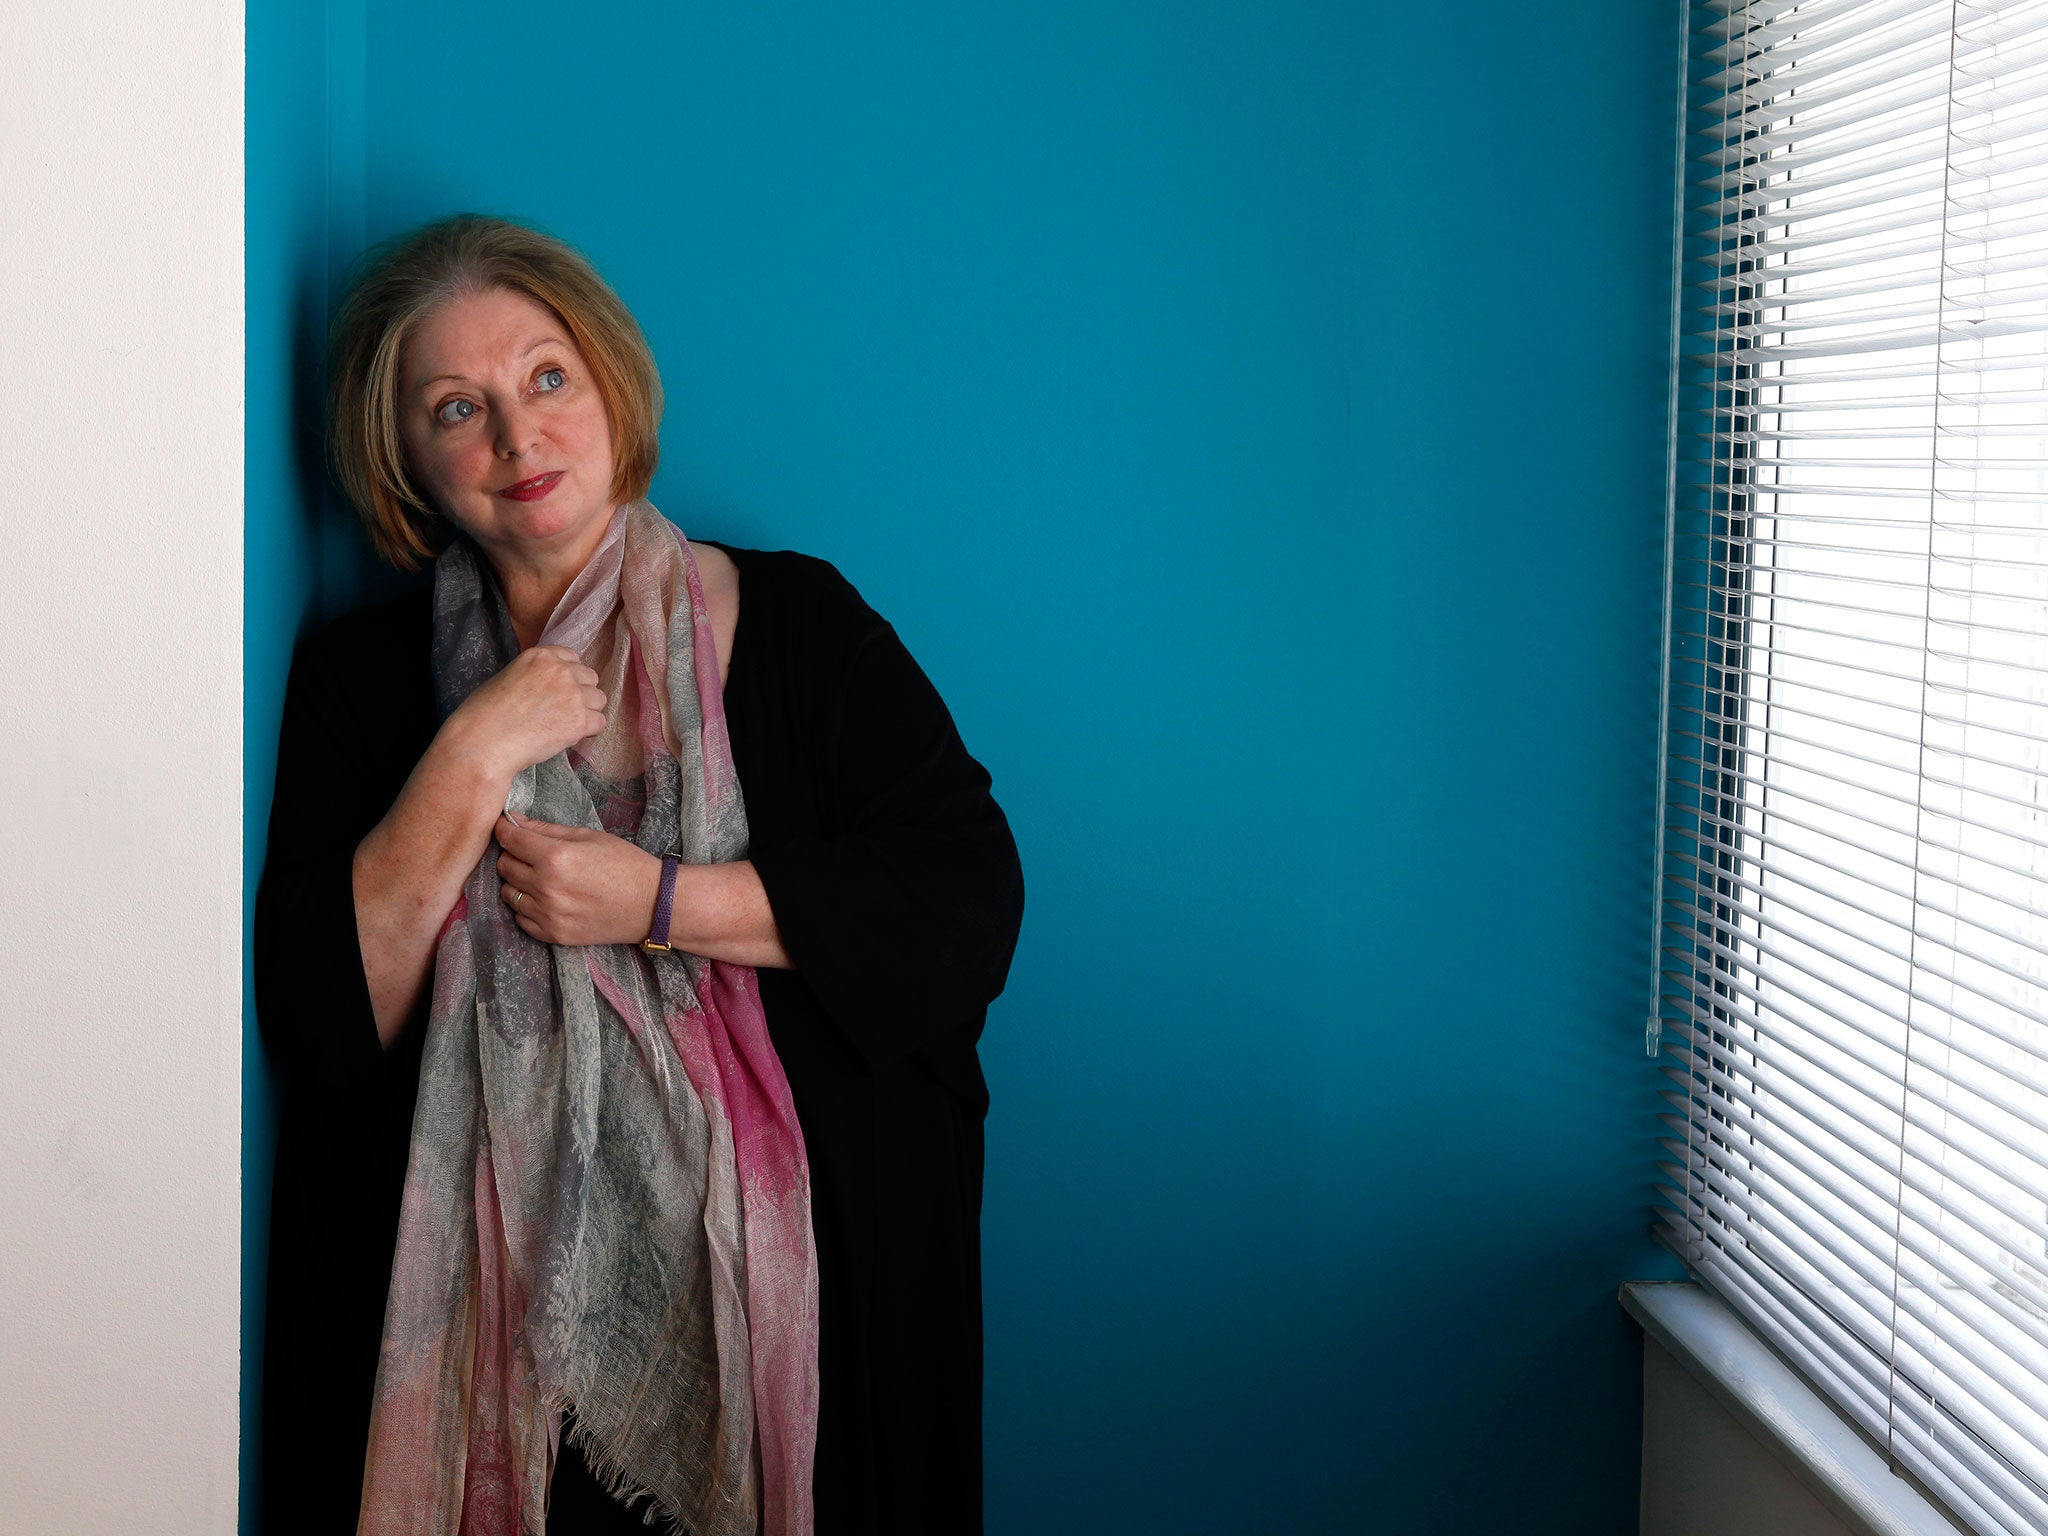 Hilary Mantel’s novel was judged to have changed the landscape